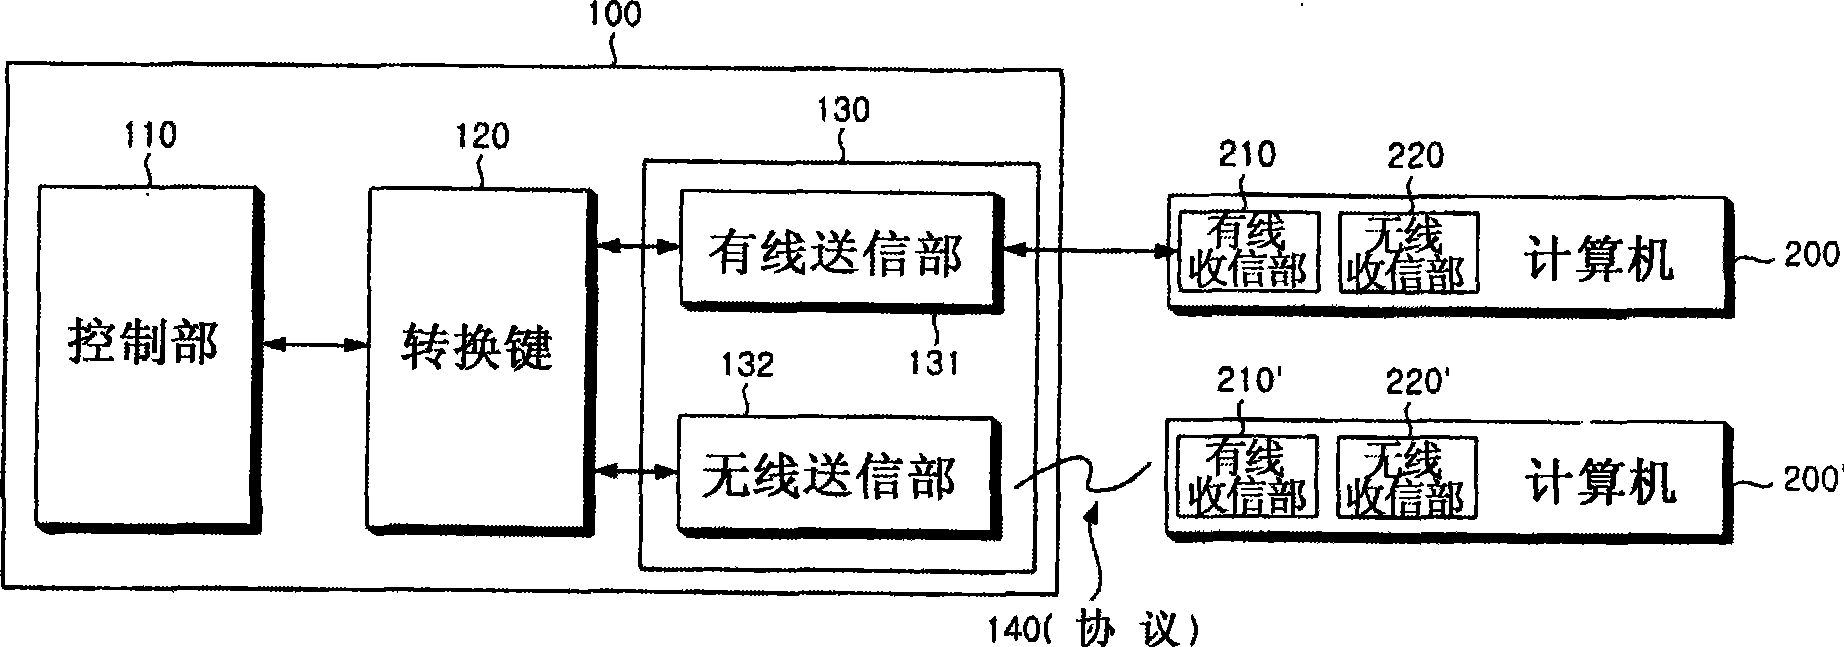 Mouse for controlling multiplex computer and control method